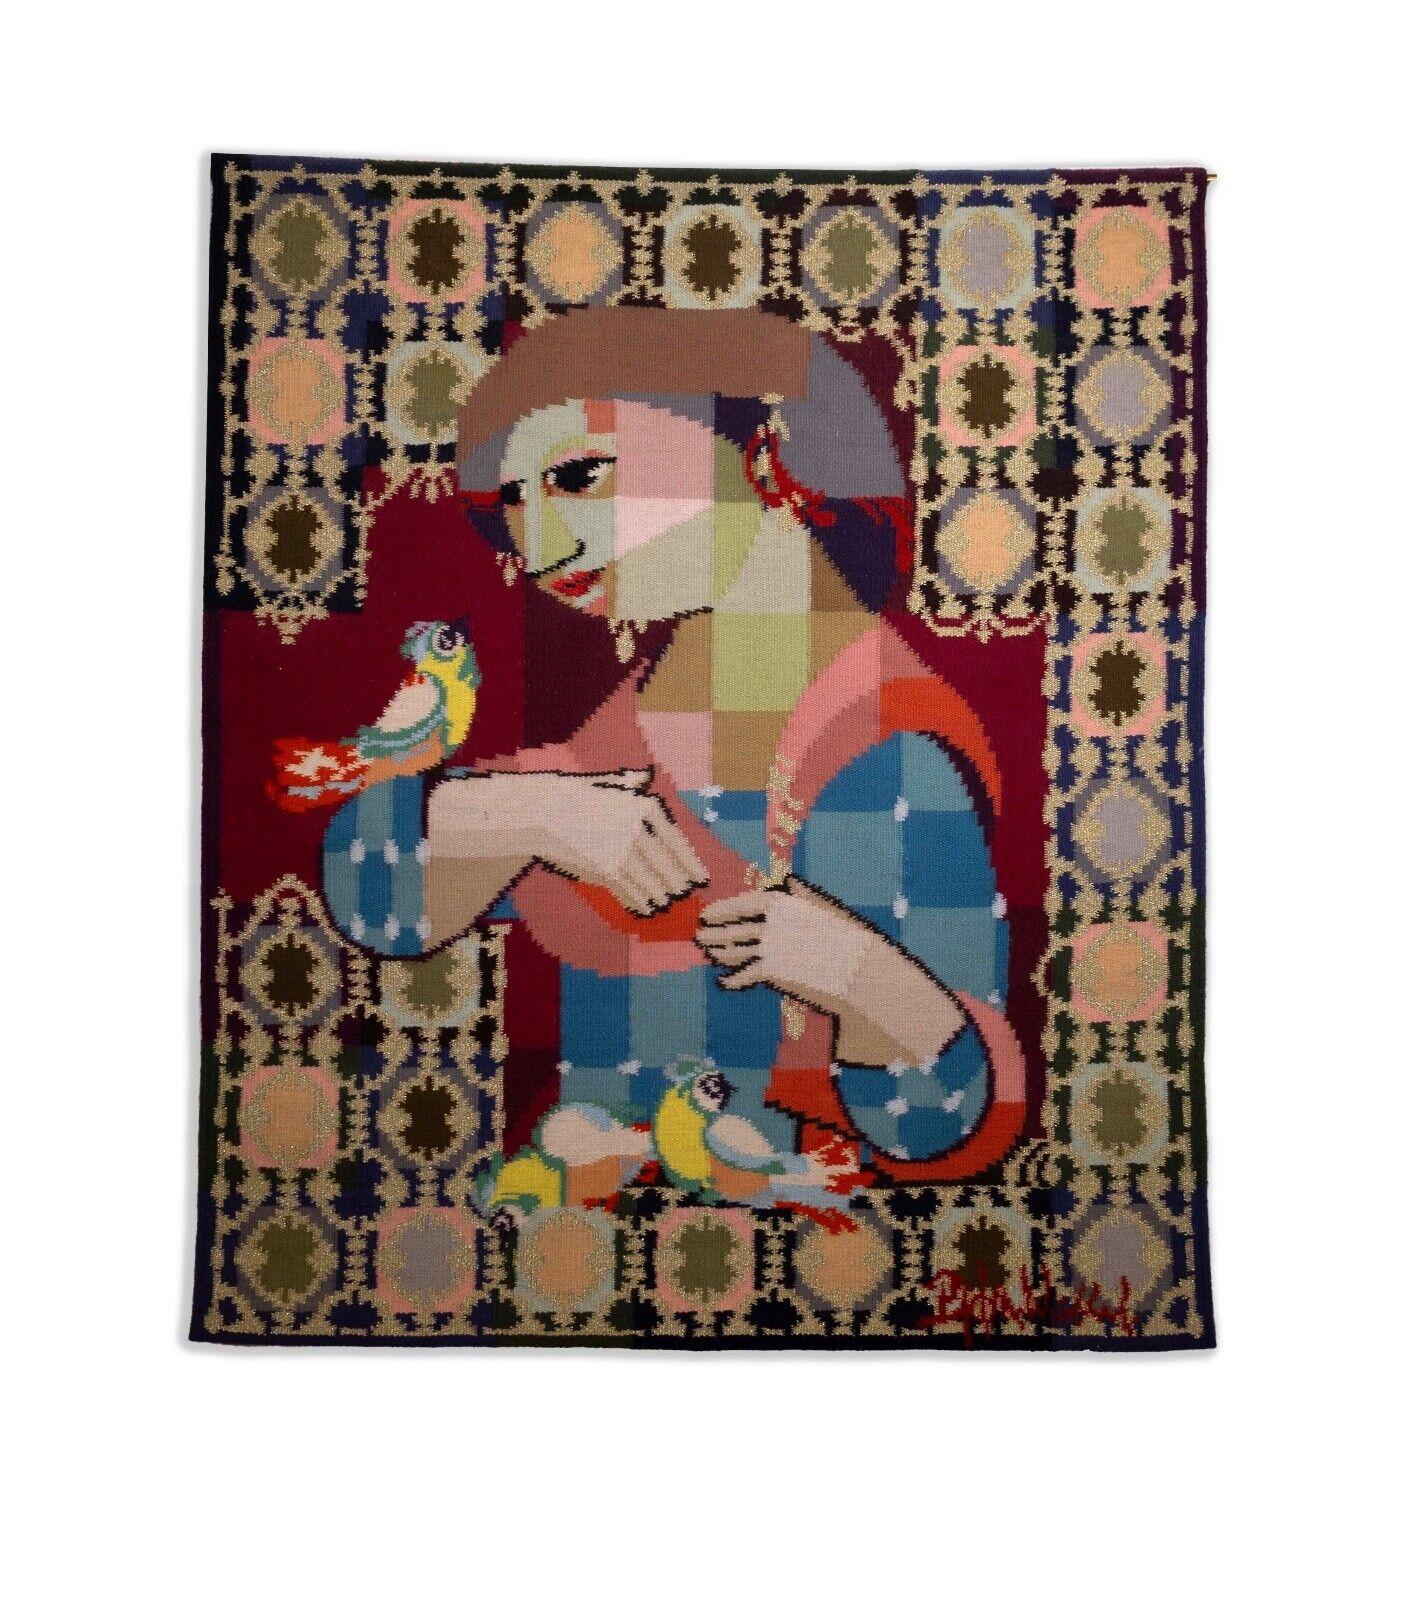 A whimsical illustrative figurative densely woven hanging tapestry titled 